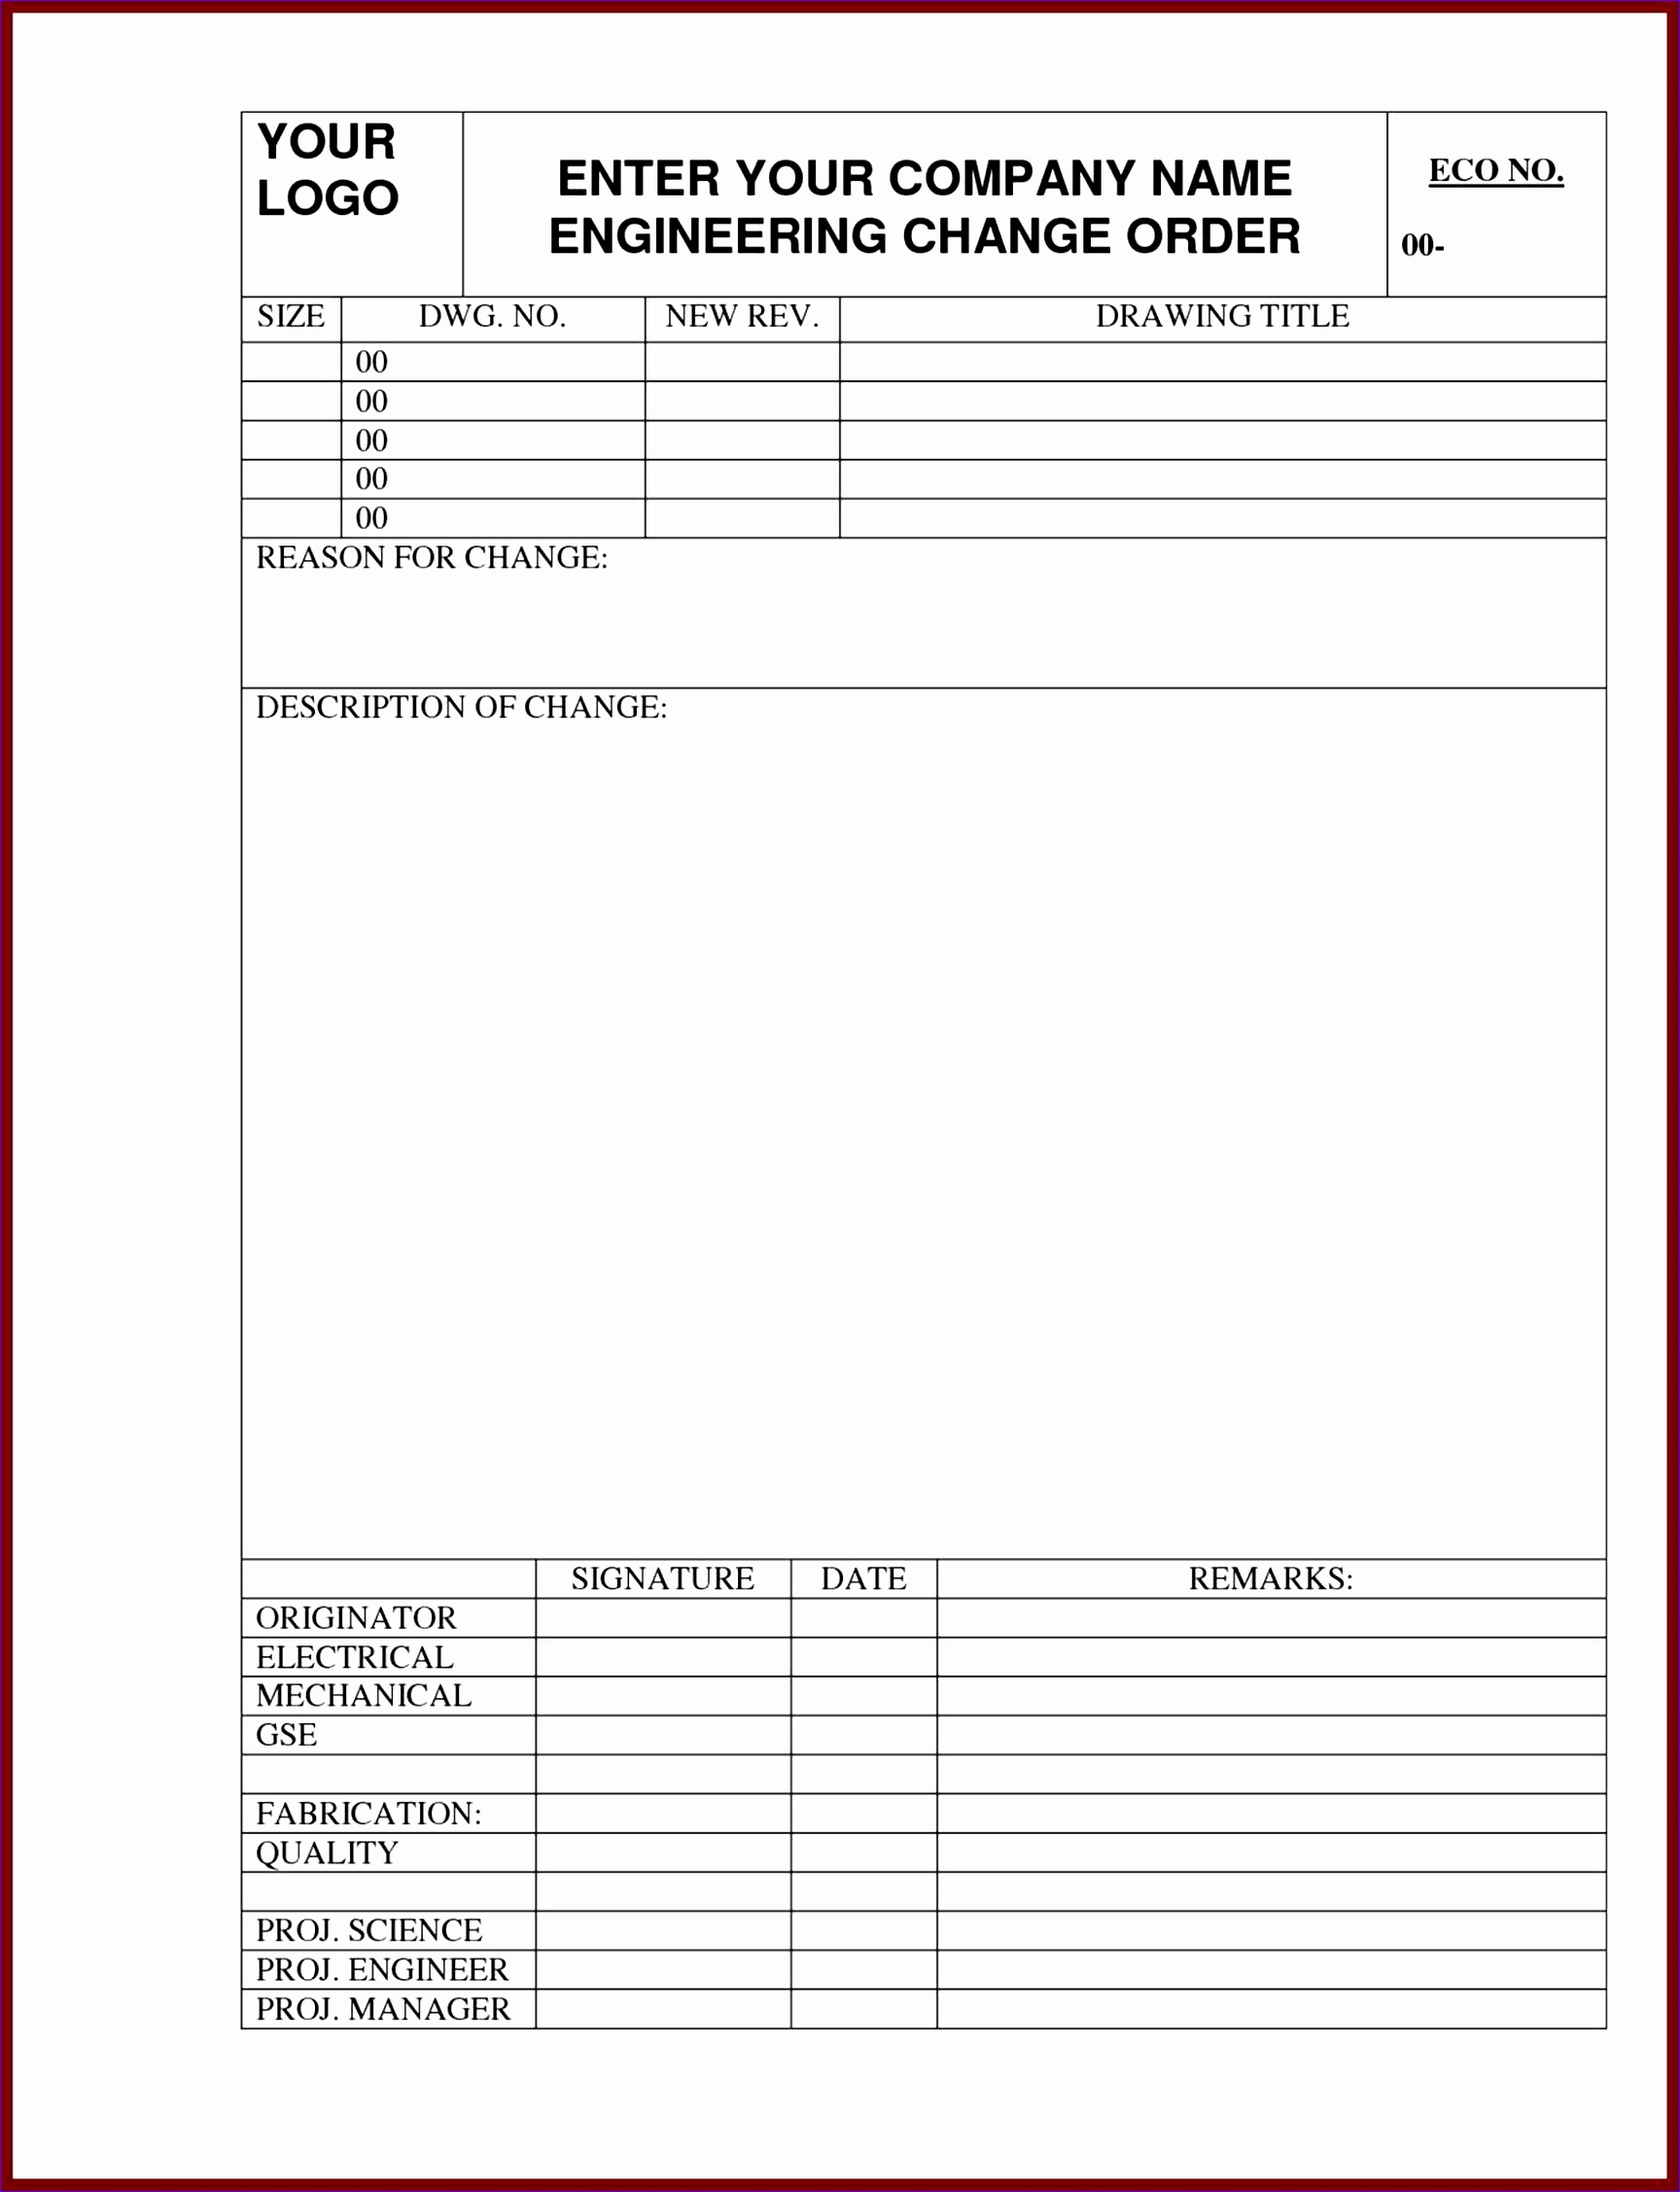 project changes gpmfirst s international islamic university s engineering change request form template international islamic university proposal engineering change template proposal 17282254